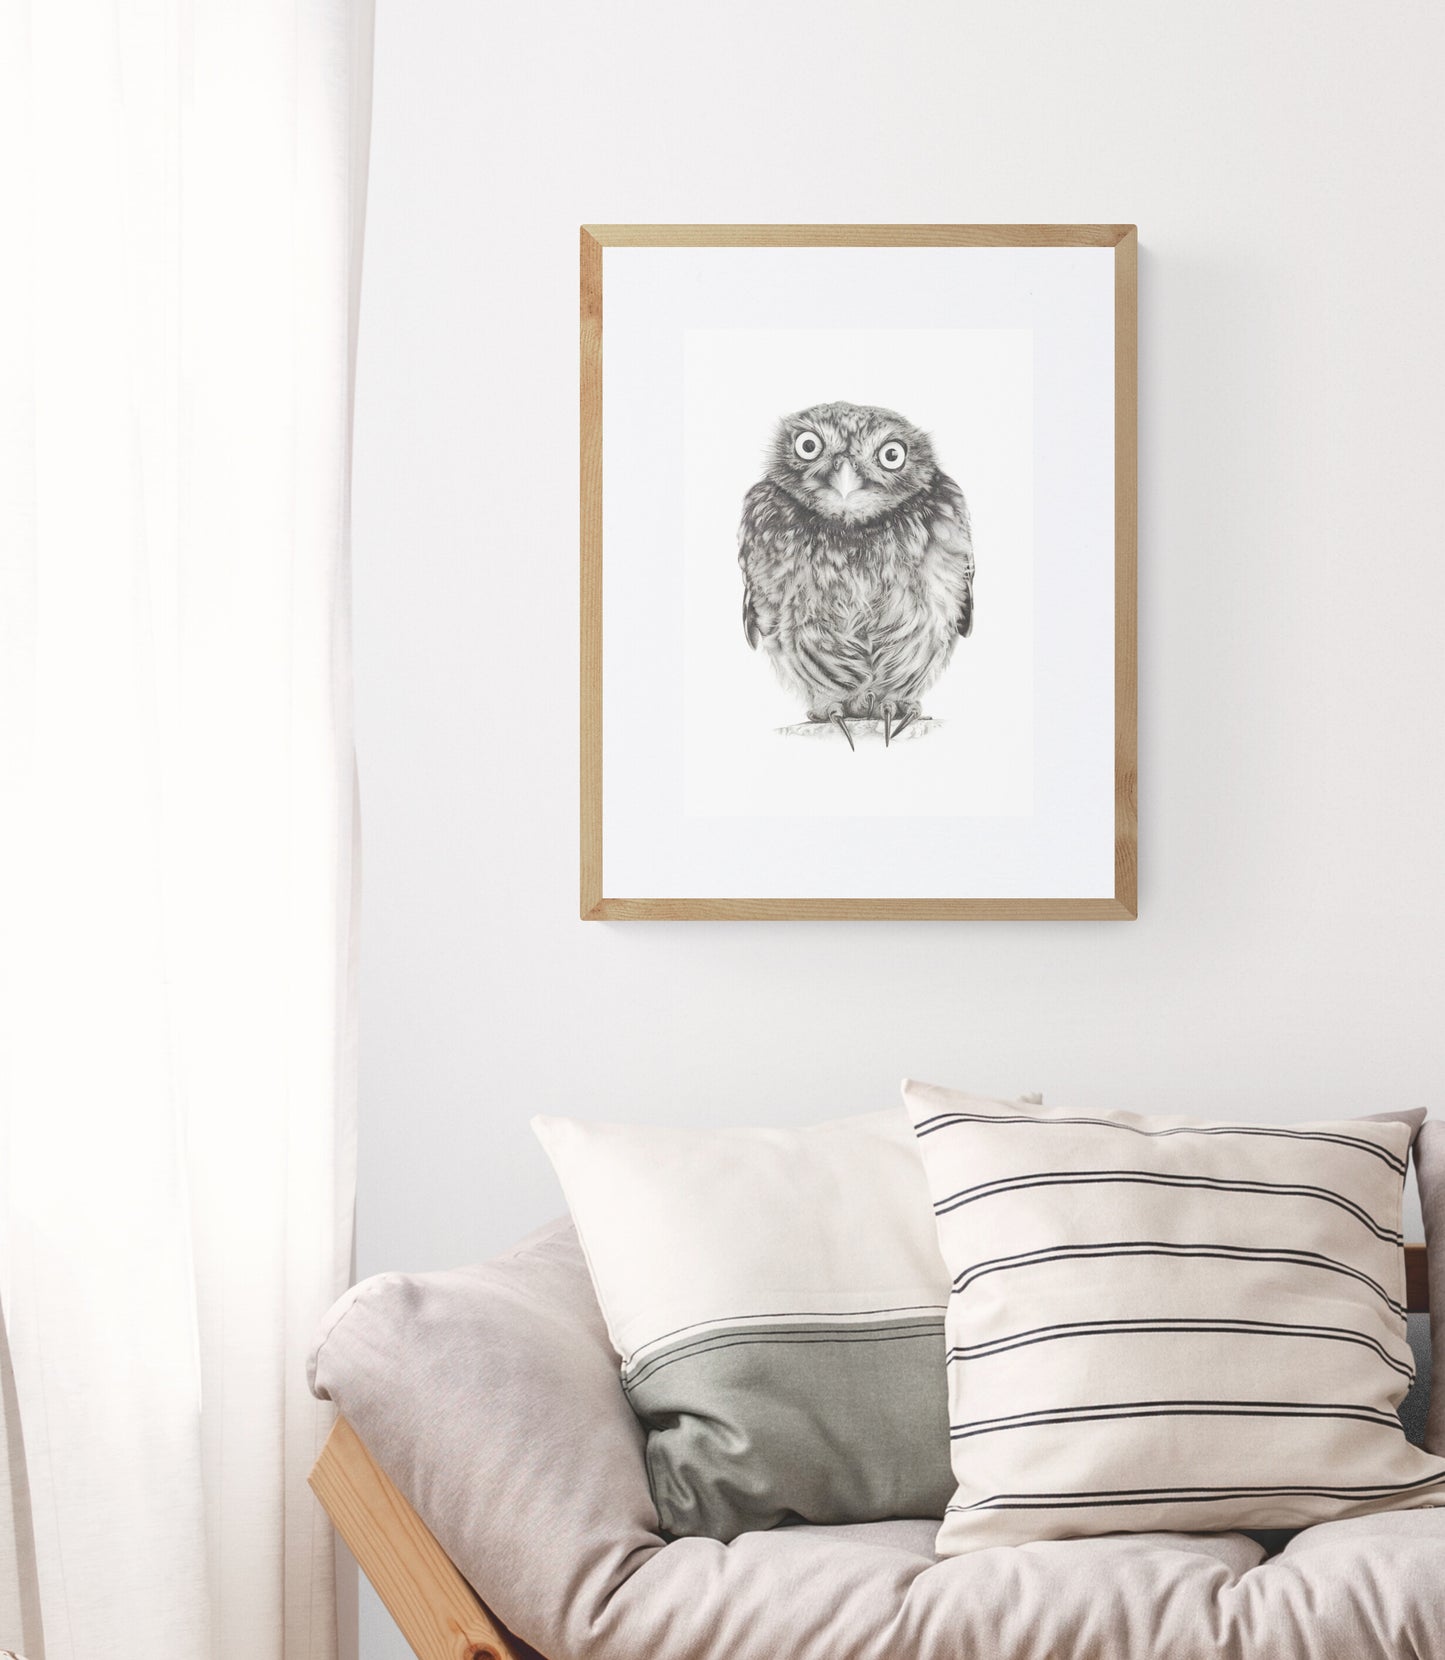 Cuddle Me Quick - Little Owl - Limited Edition Giclee Prints